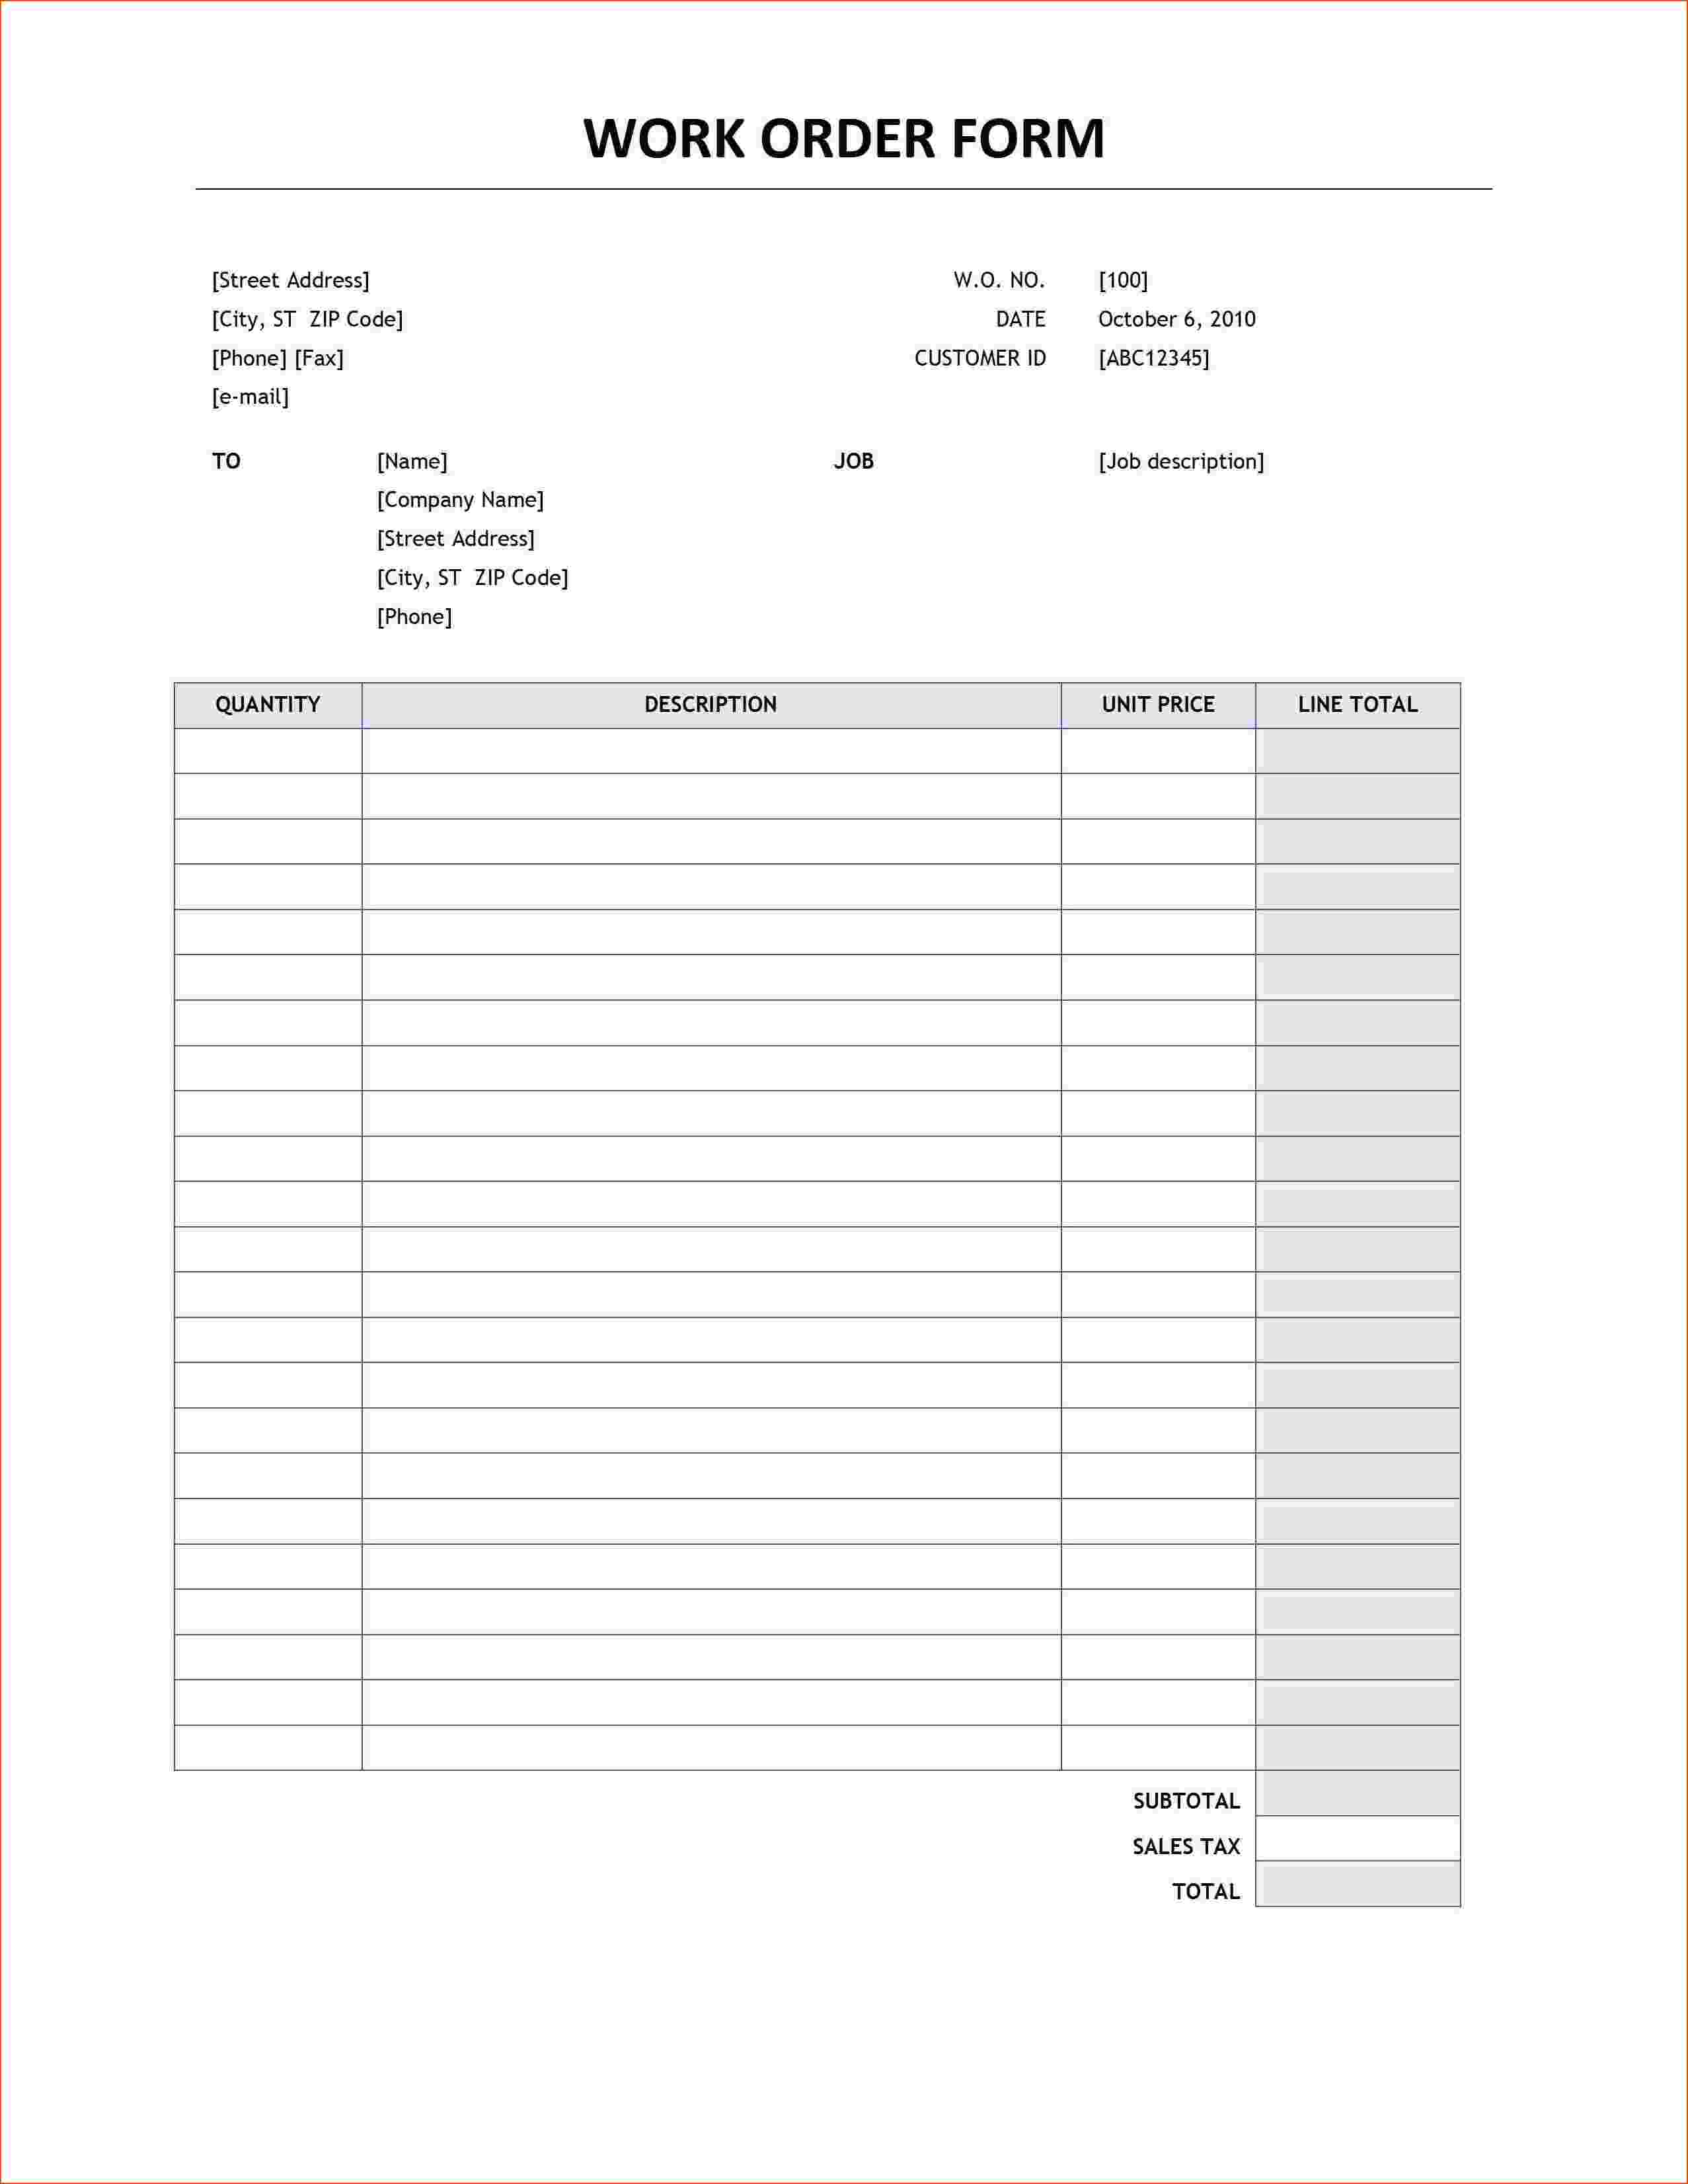 order form template microsoft word   Boat.jeremyeaton.co